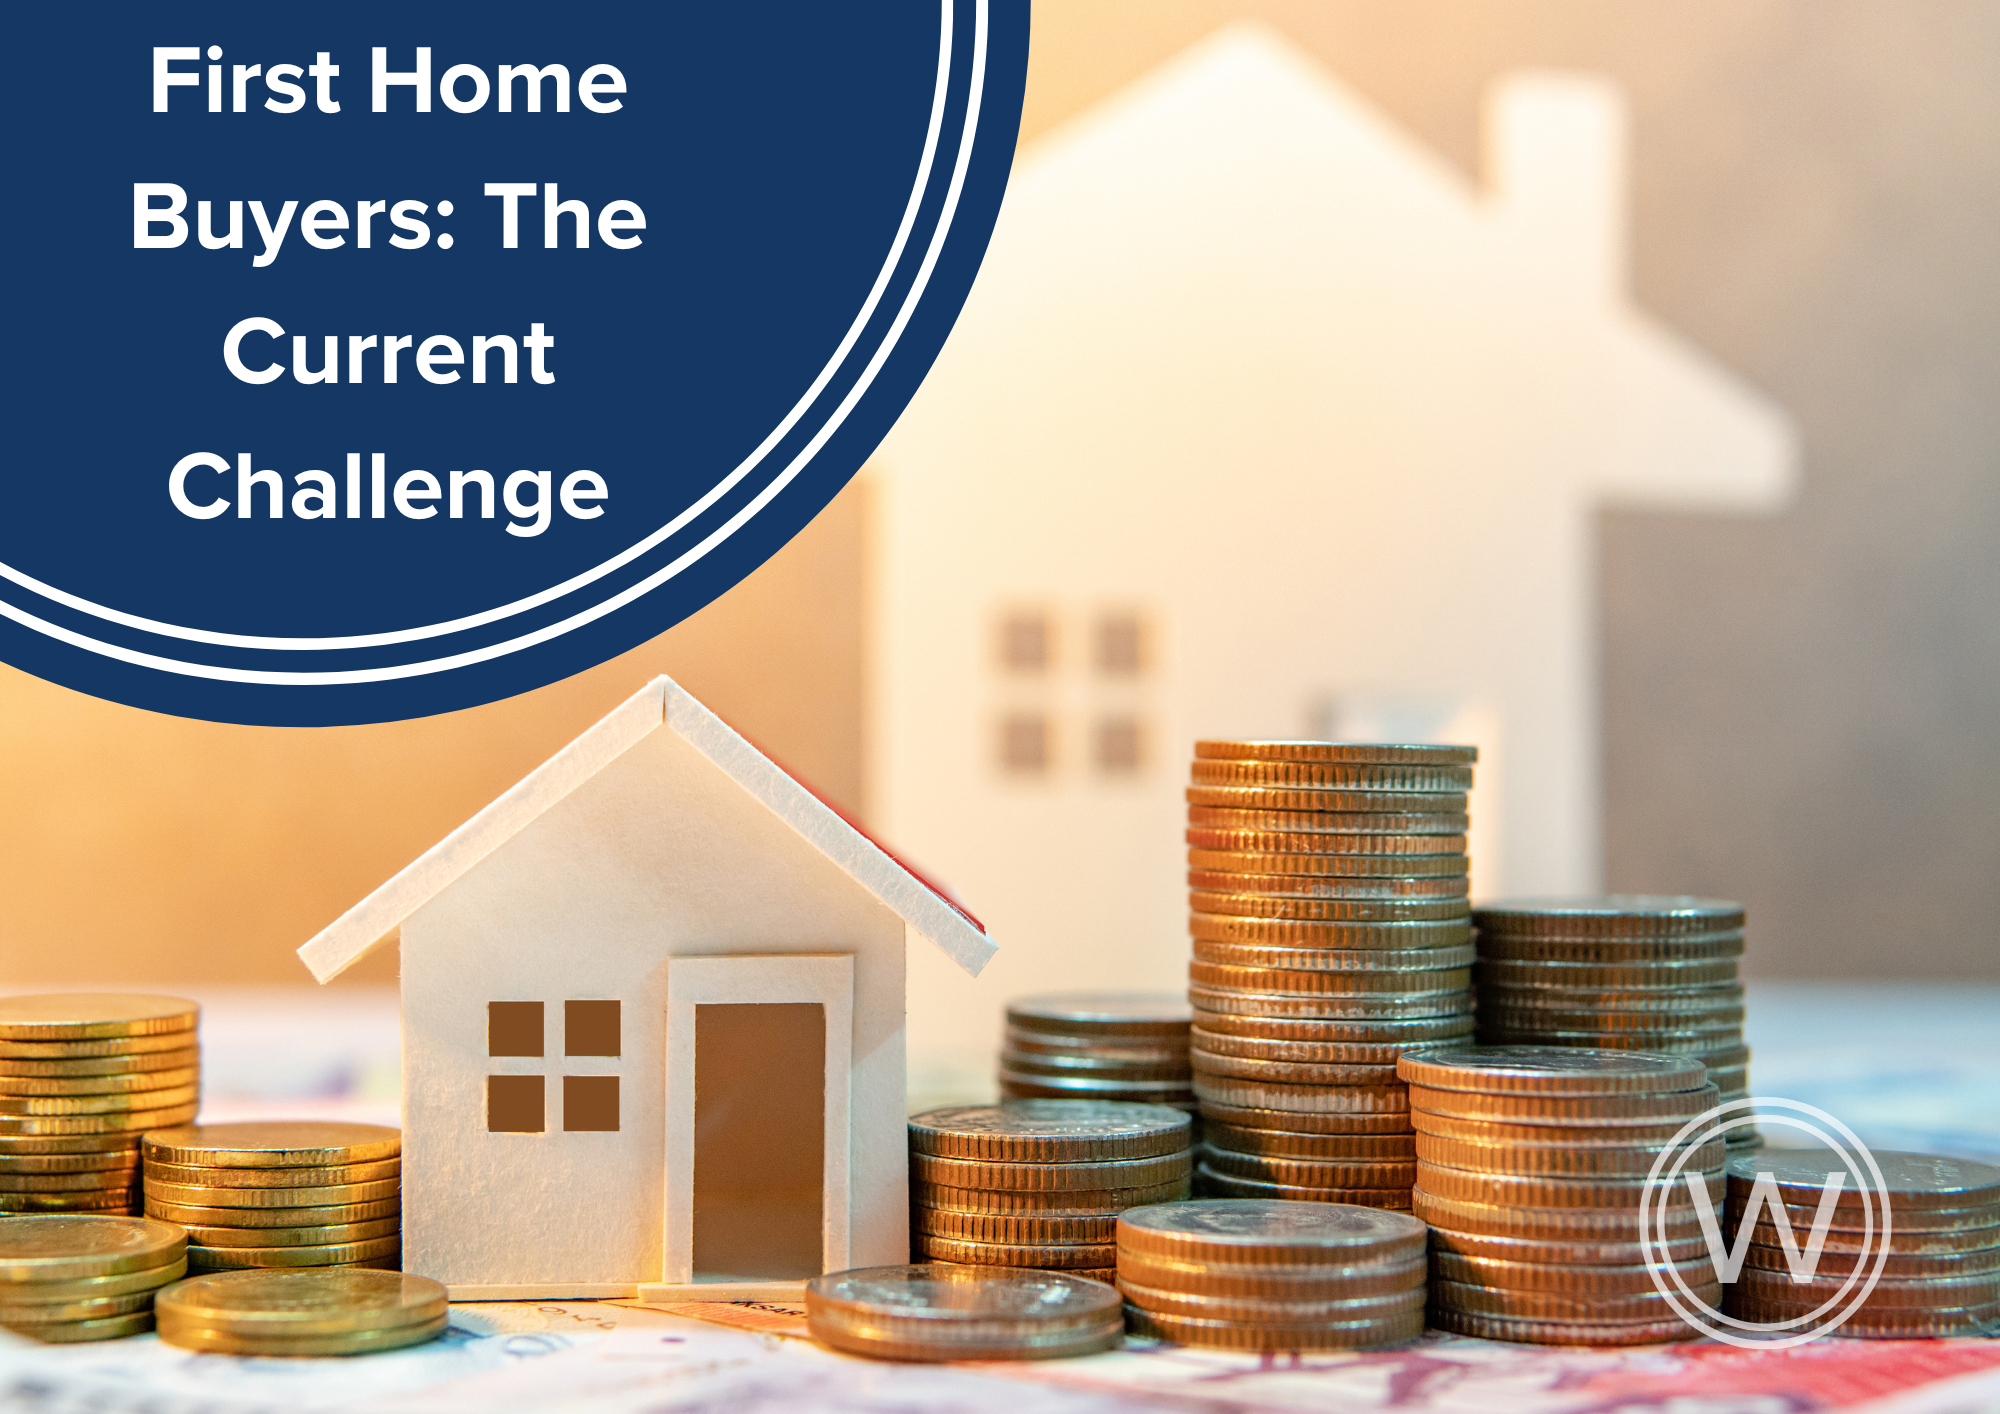 First Home Buyers: The Current Challenge